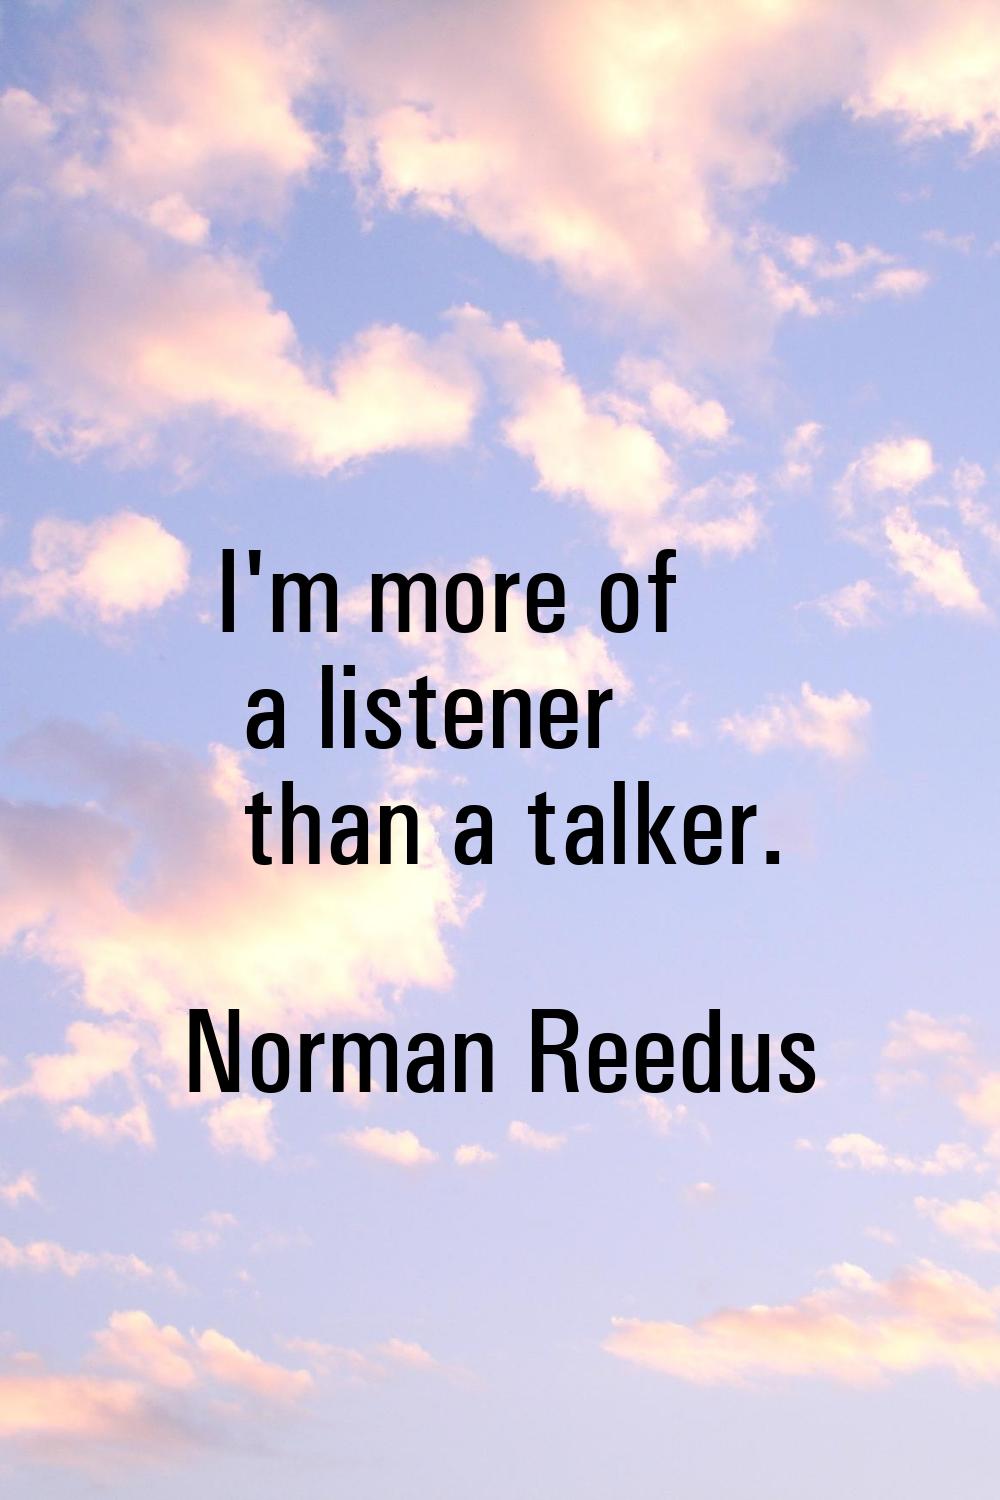 I'm more of a listener than a talker.